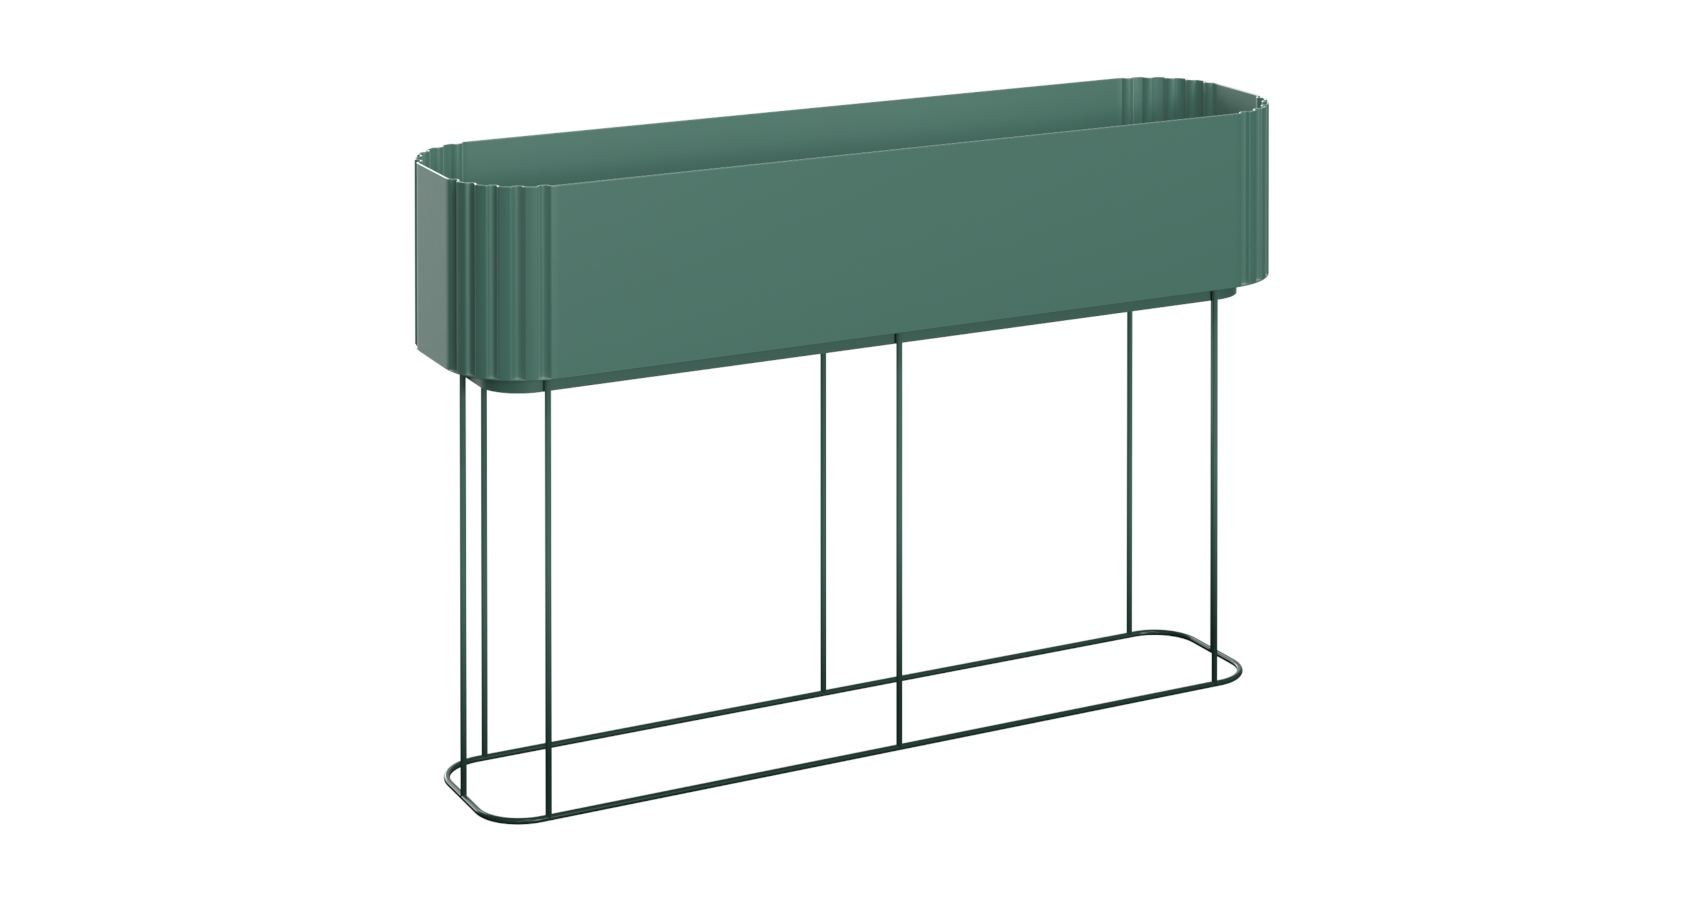 Cubby Planter in green 900mm wide in front view